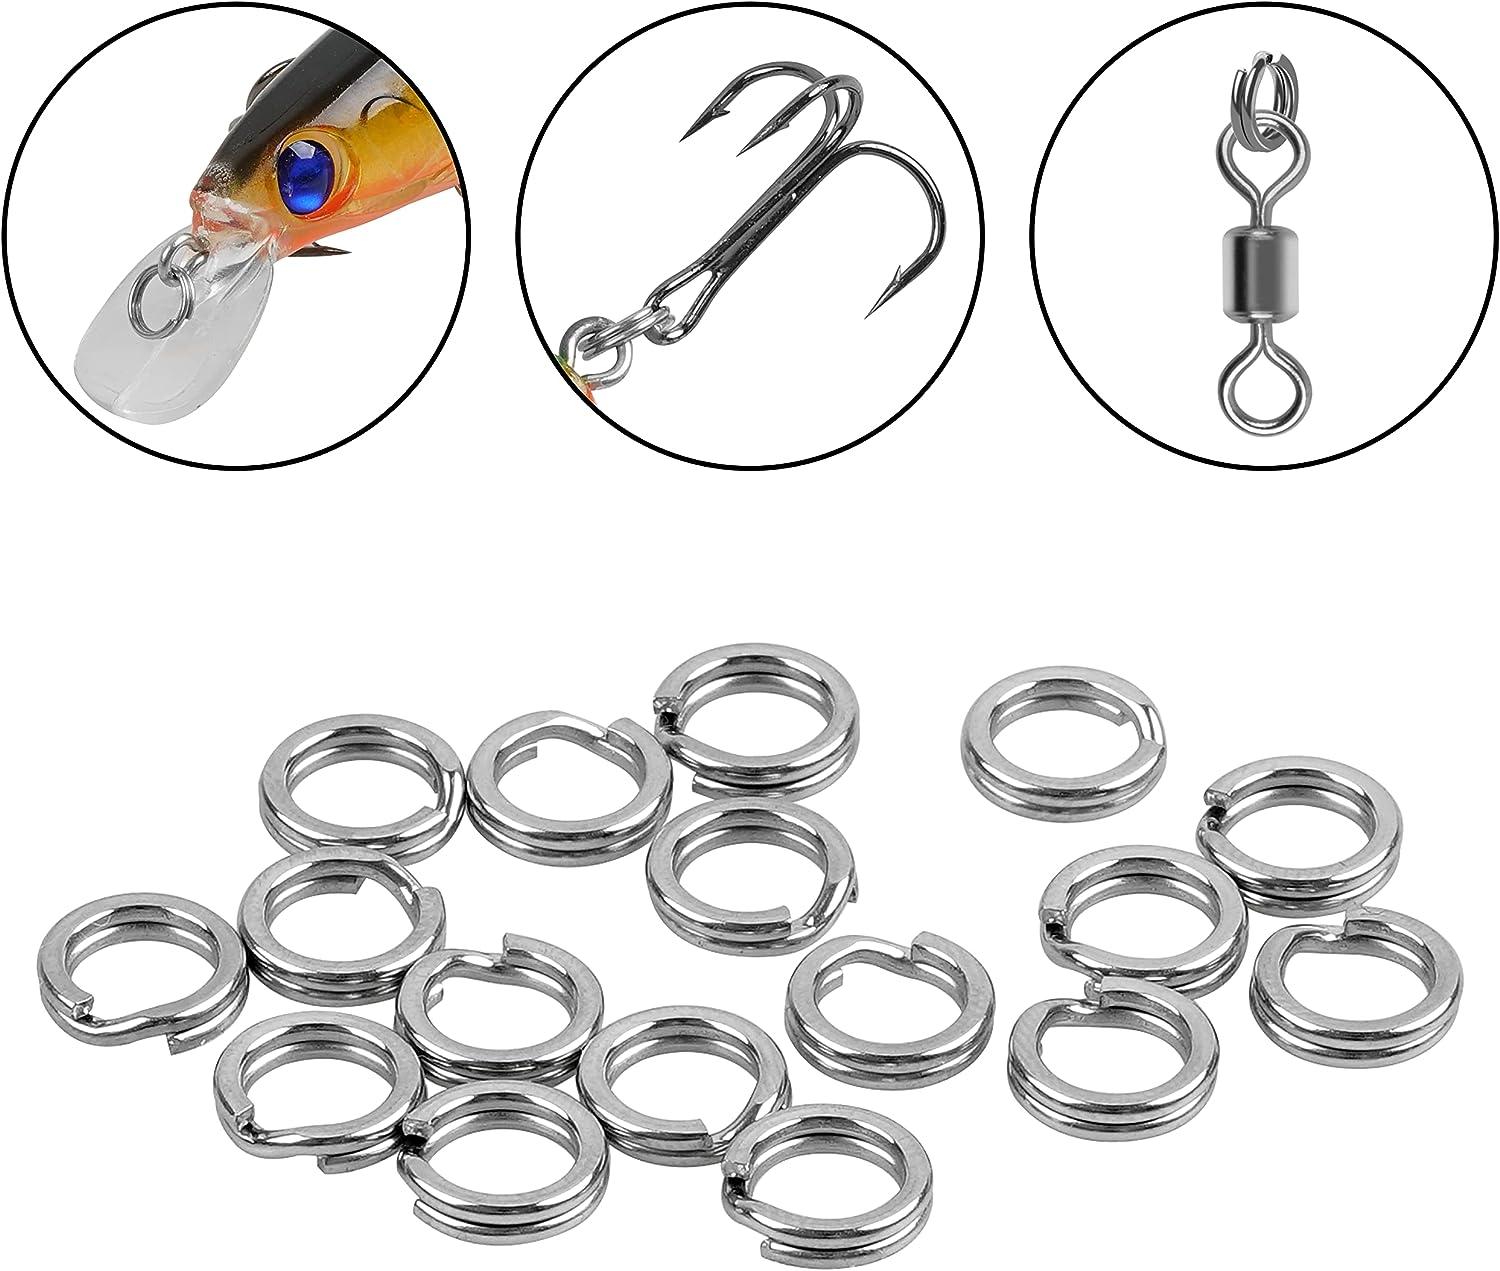 50pcs Double-circle Split Rings, Fishing Lure Connectors, High Strength  Spilt Rings, Fishing Accessories